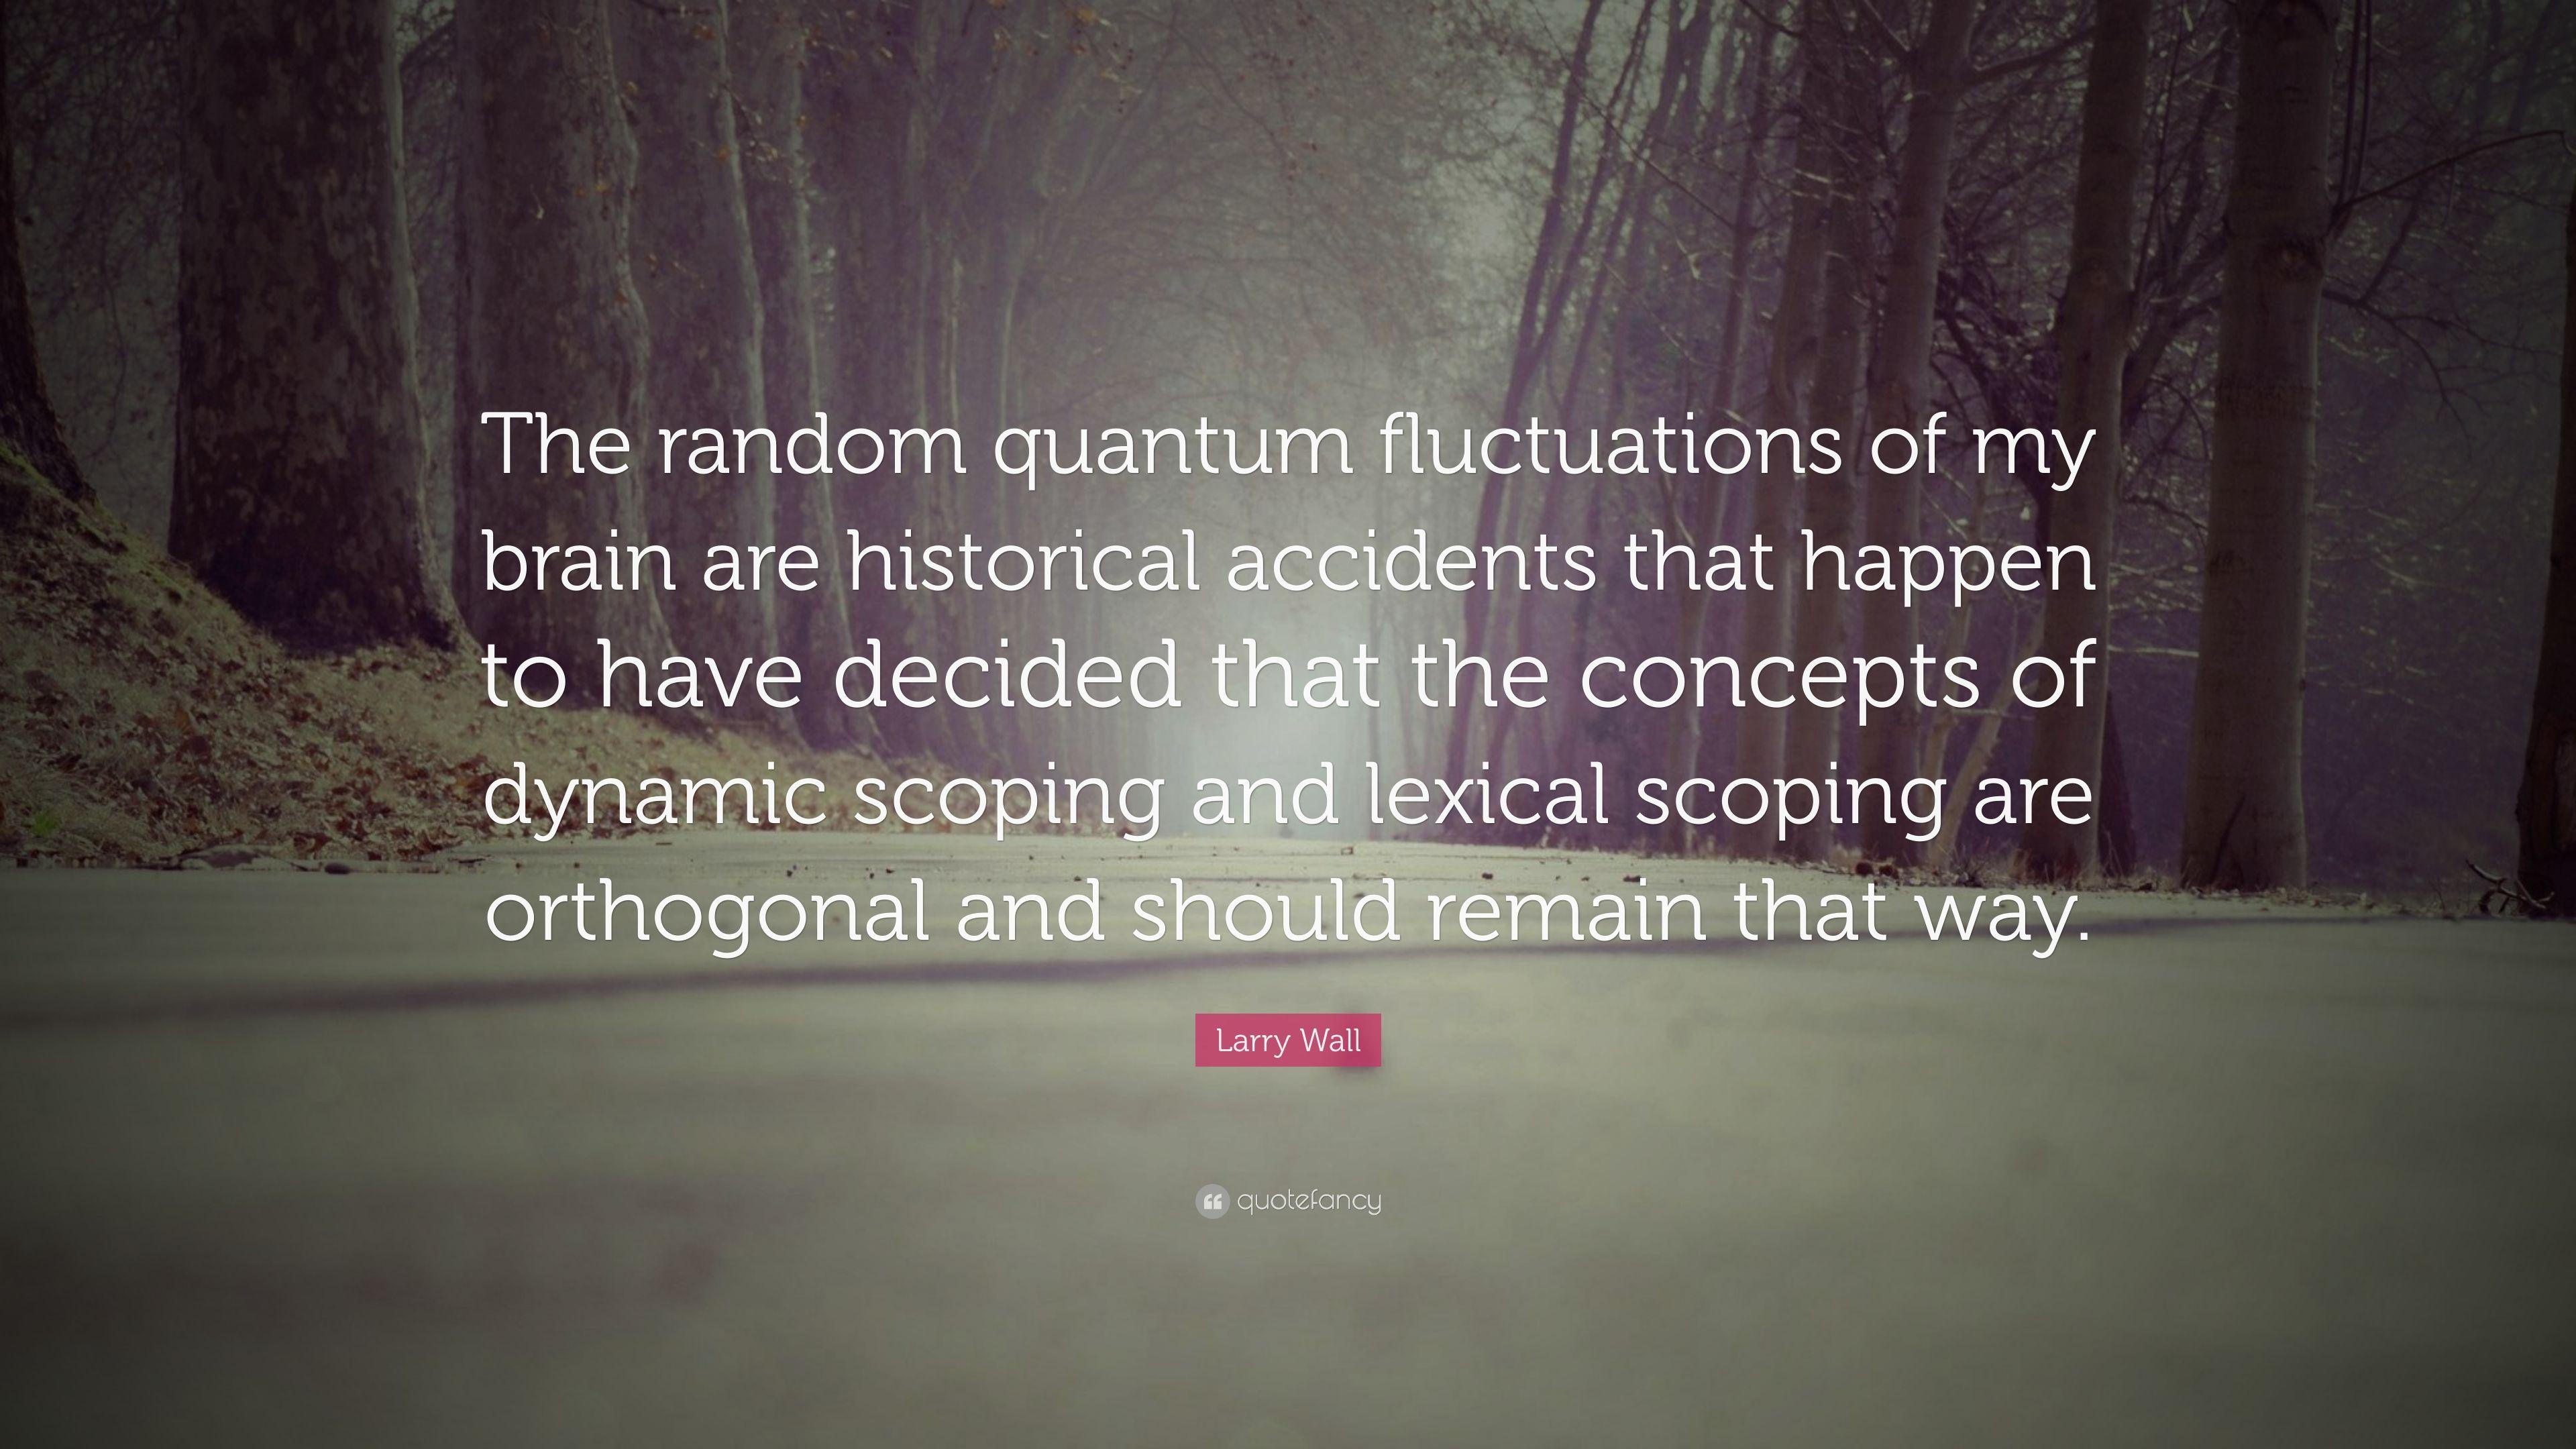 Larry Wall Quote: “The random quantum fluctuations of my brain are